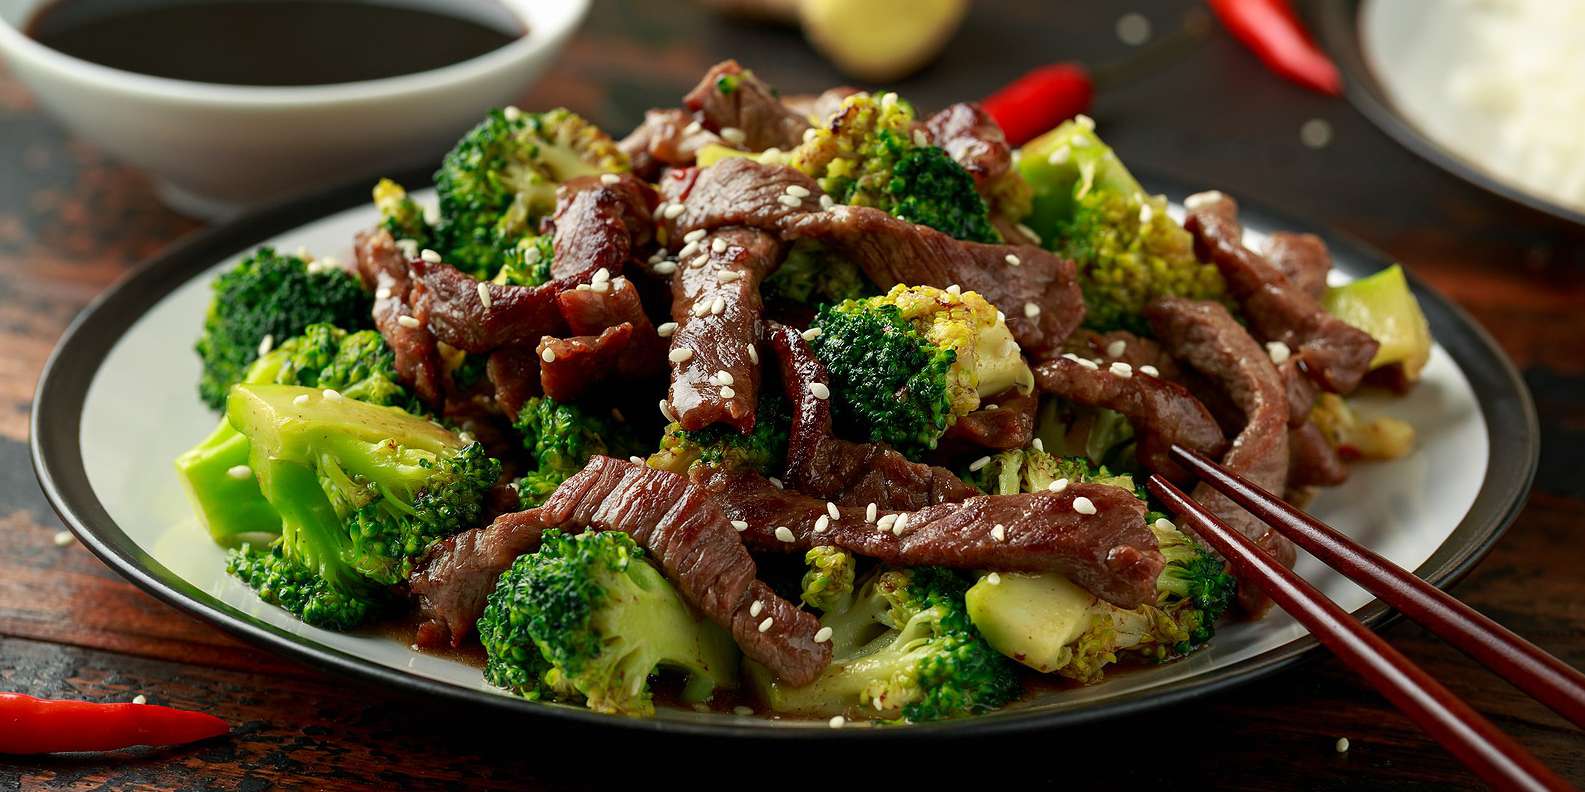 Easy Beef and Broccoli